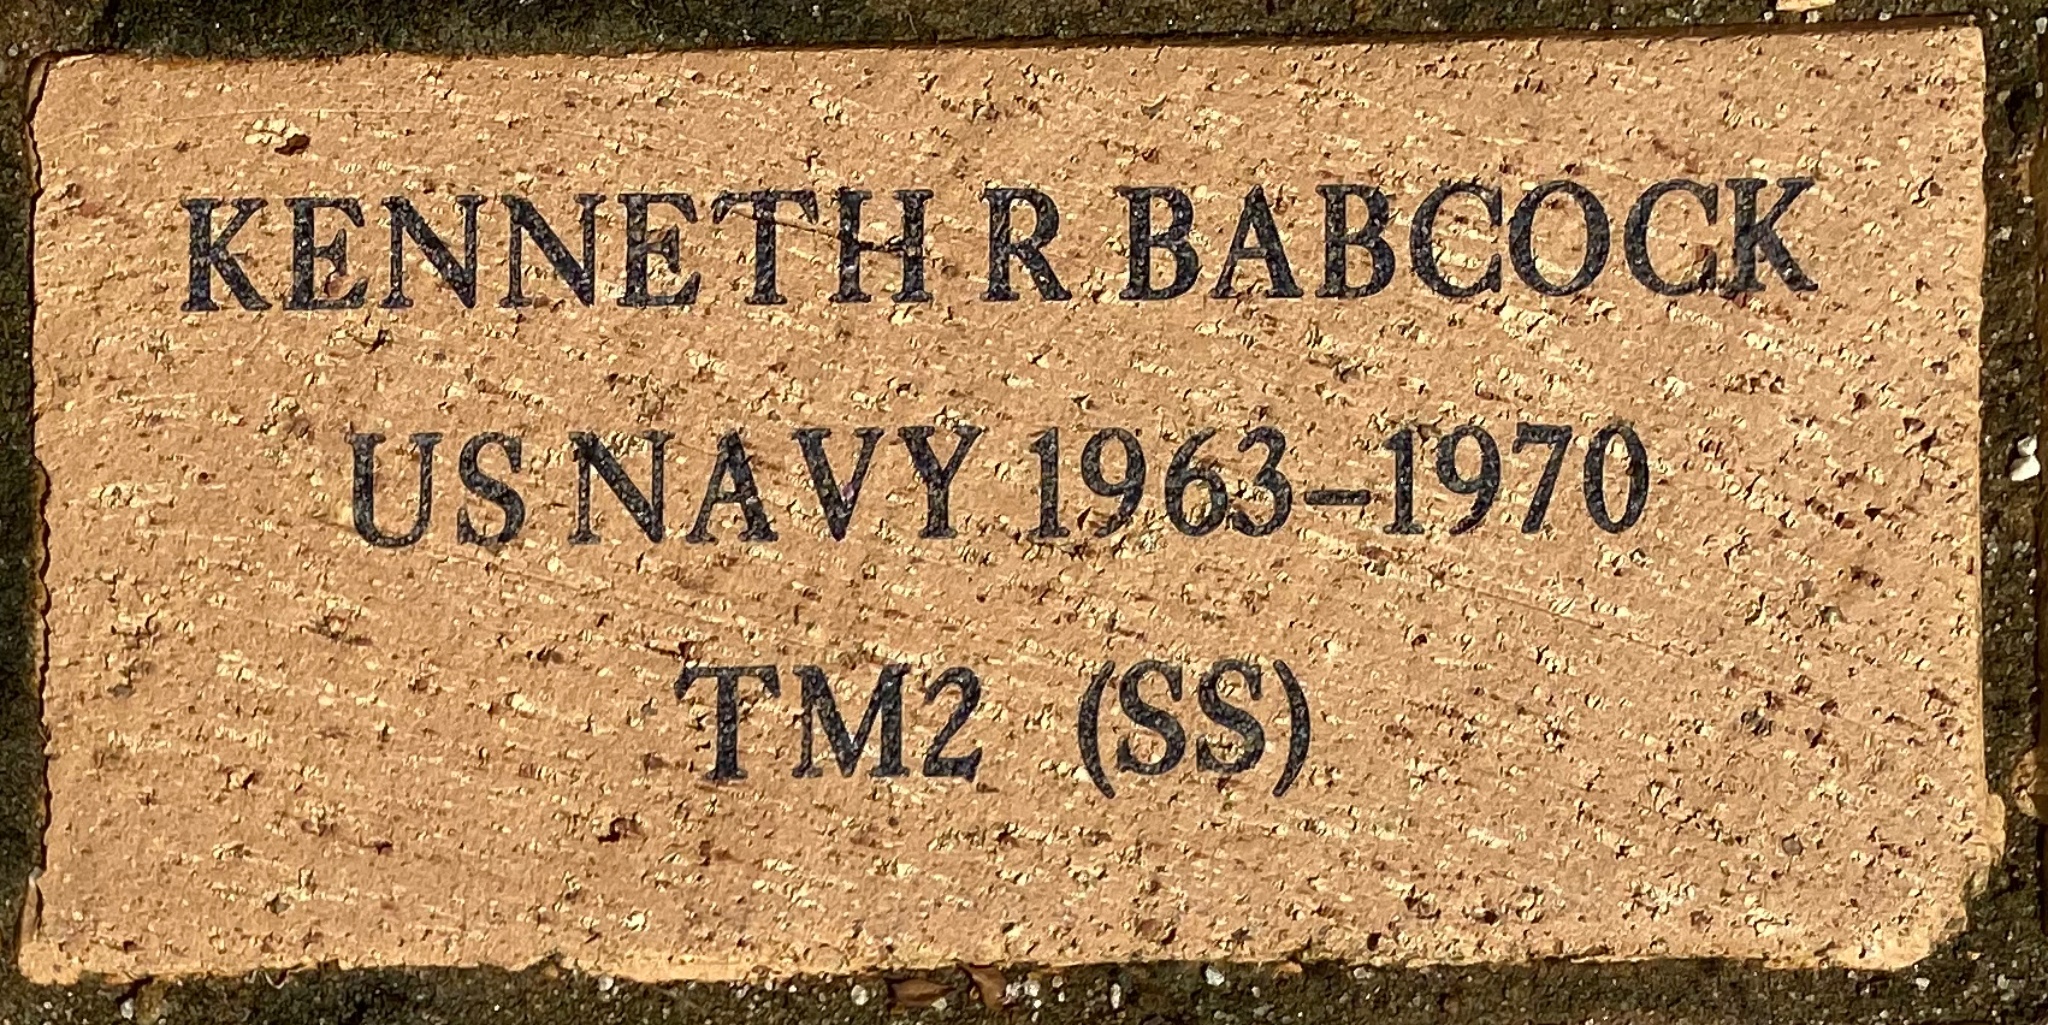 Kenneth R Babcock US Navy 1963-1970 TM2 (SS)